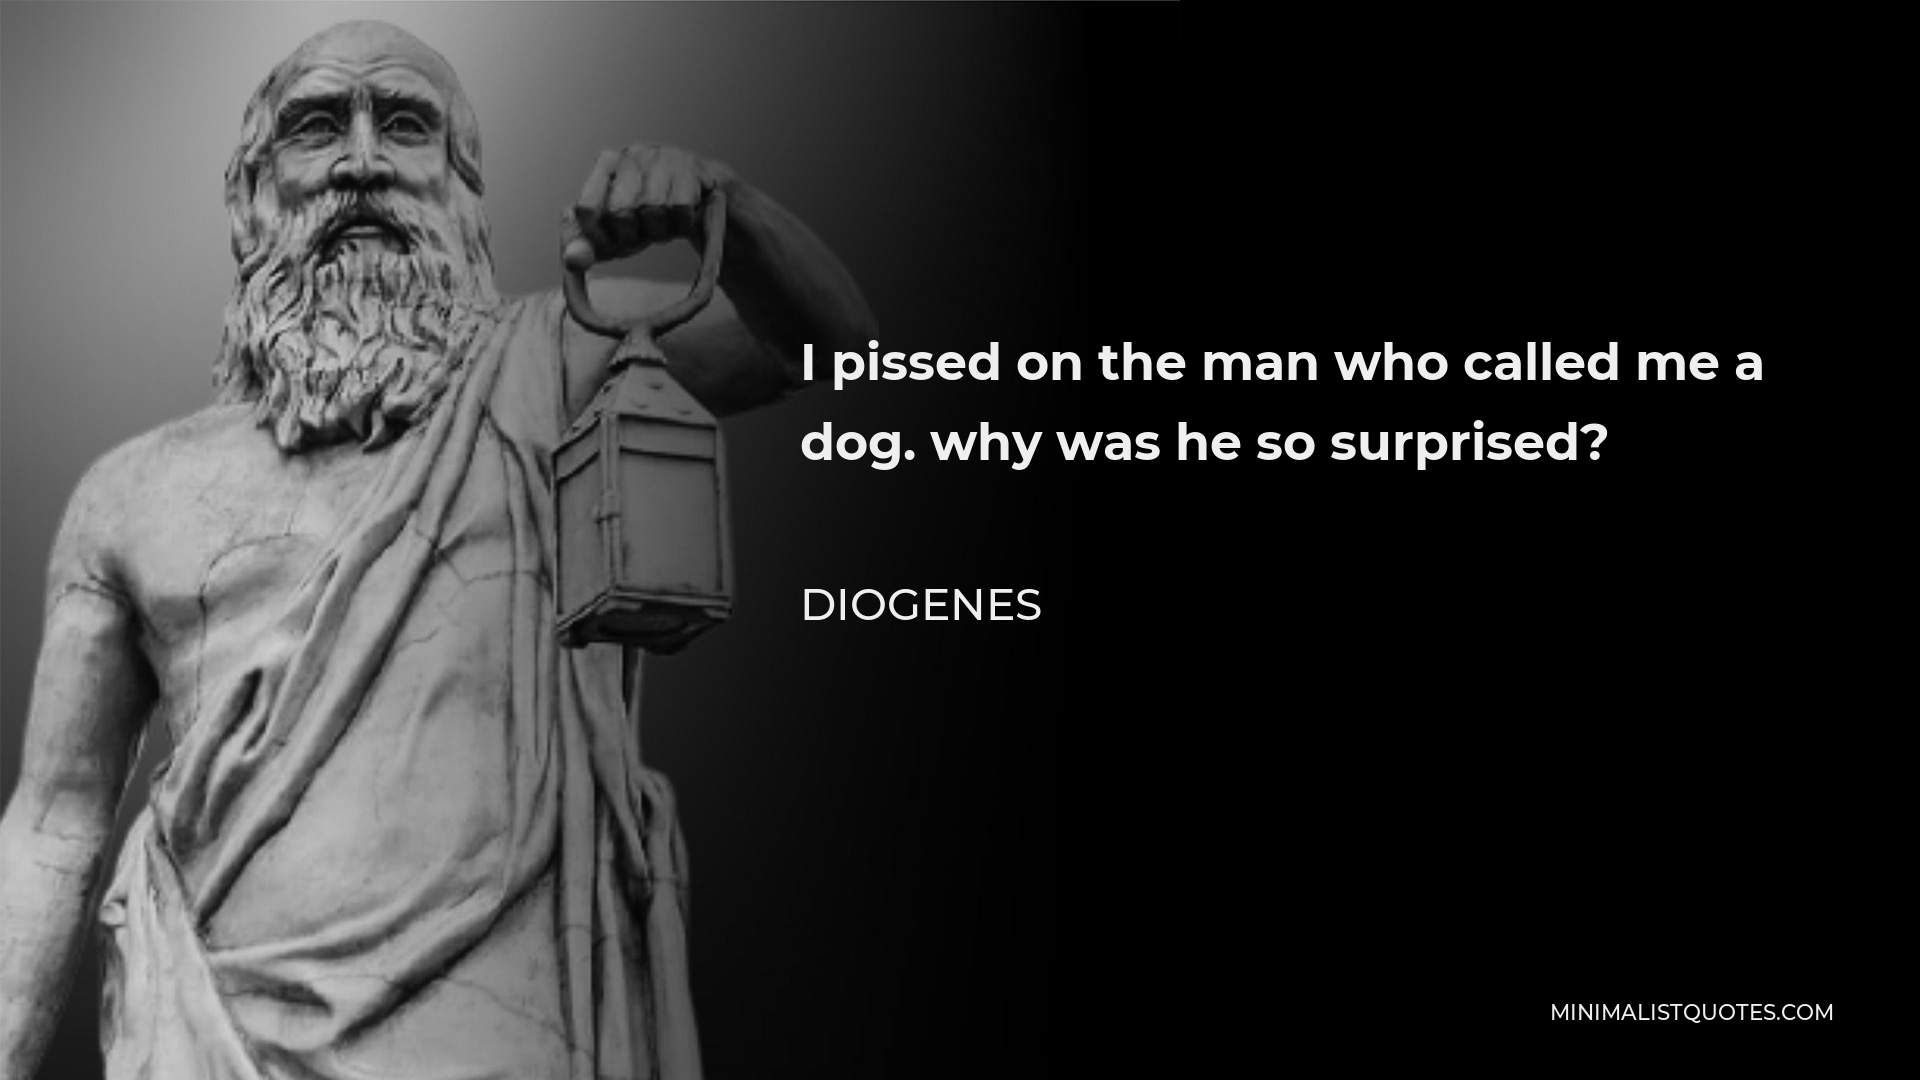 Diogenes Quote - I pissed on the man who called me a dog. why was he so surprised?